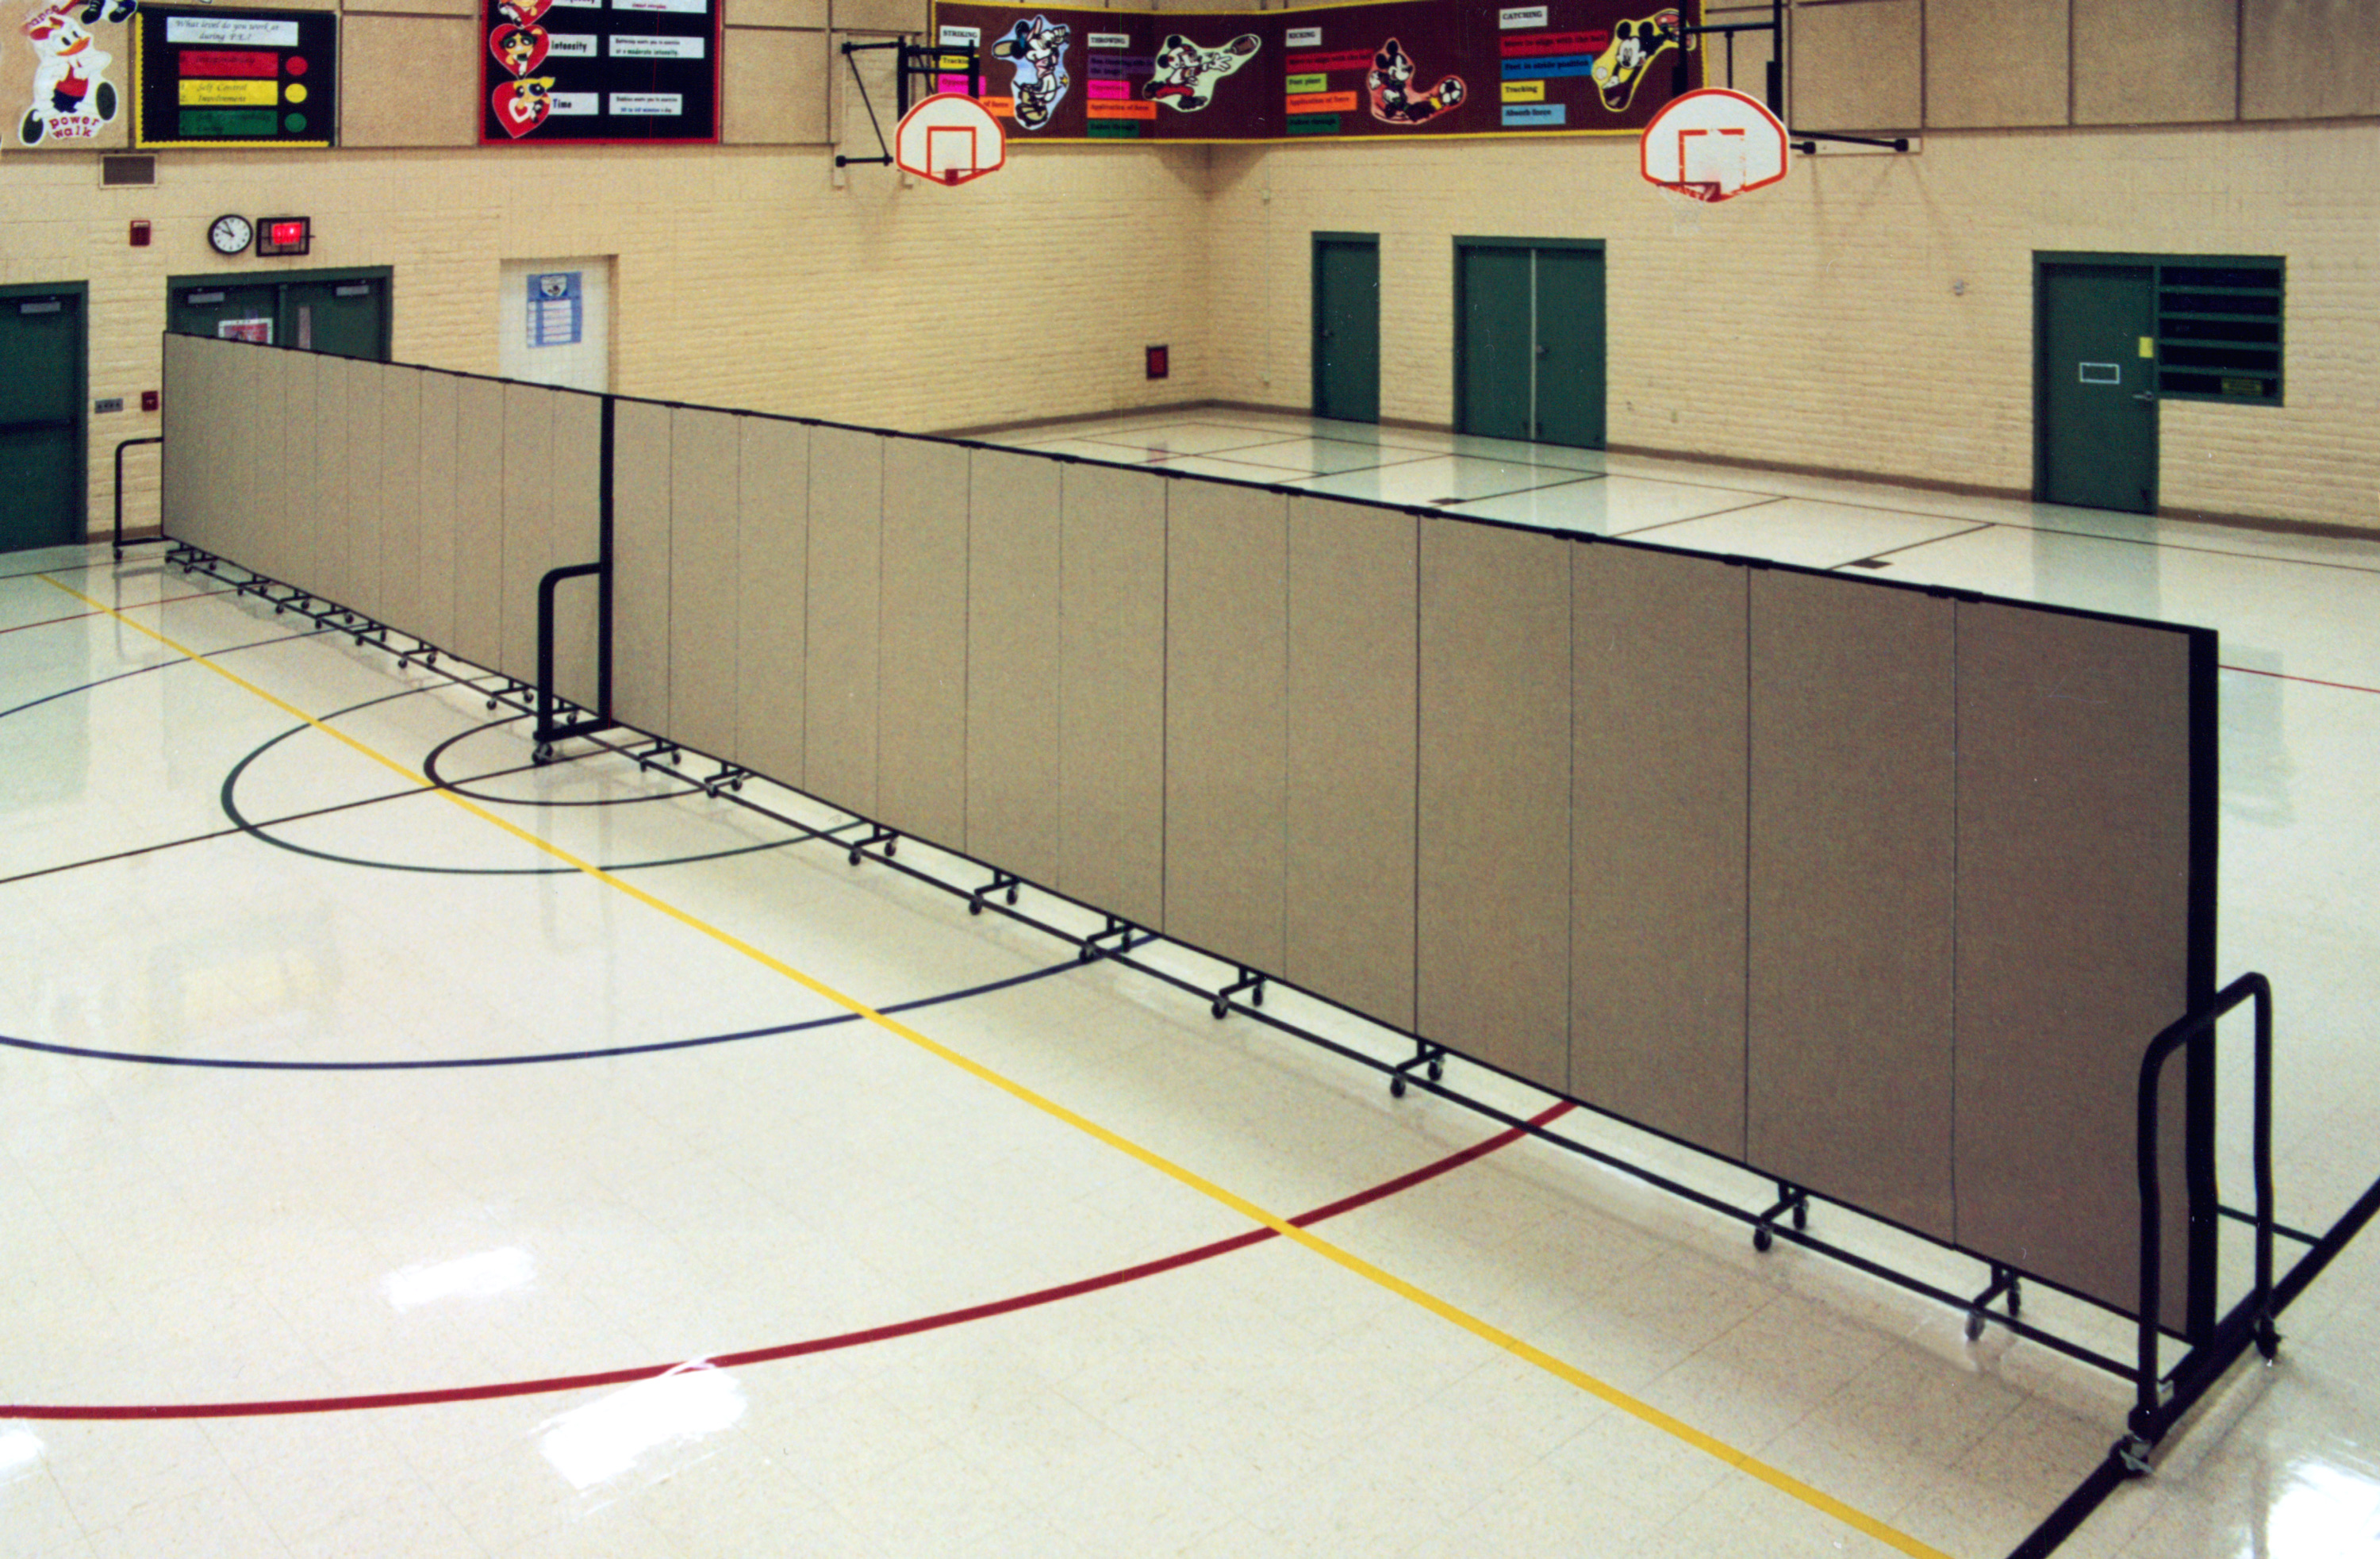 Too hot for outdoor PE class? Screenflex accordion walls are used to divide this gymnatorium. Half is used for PE and half for lunch.